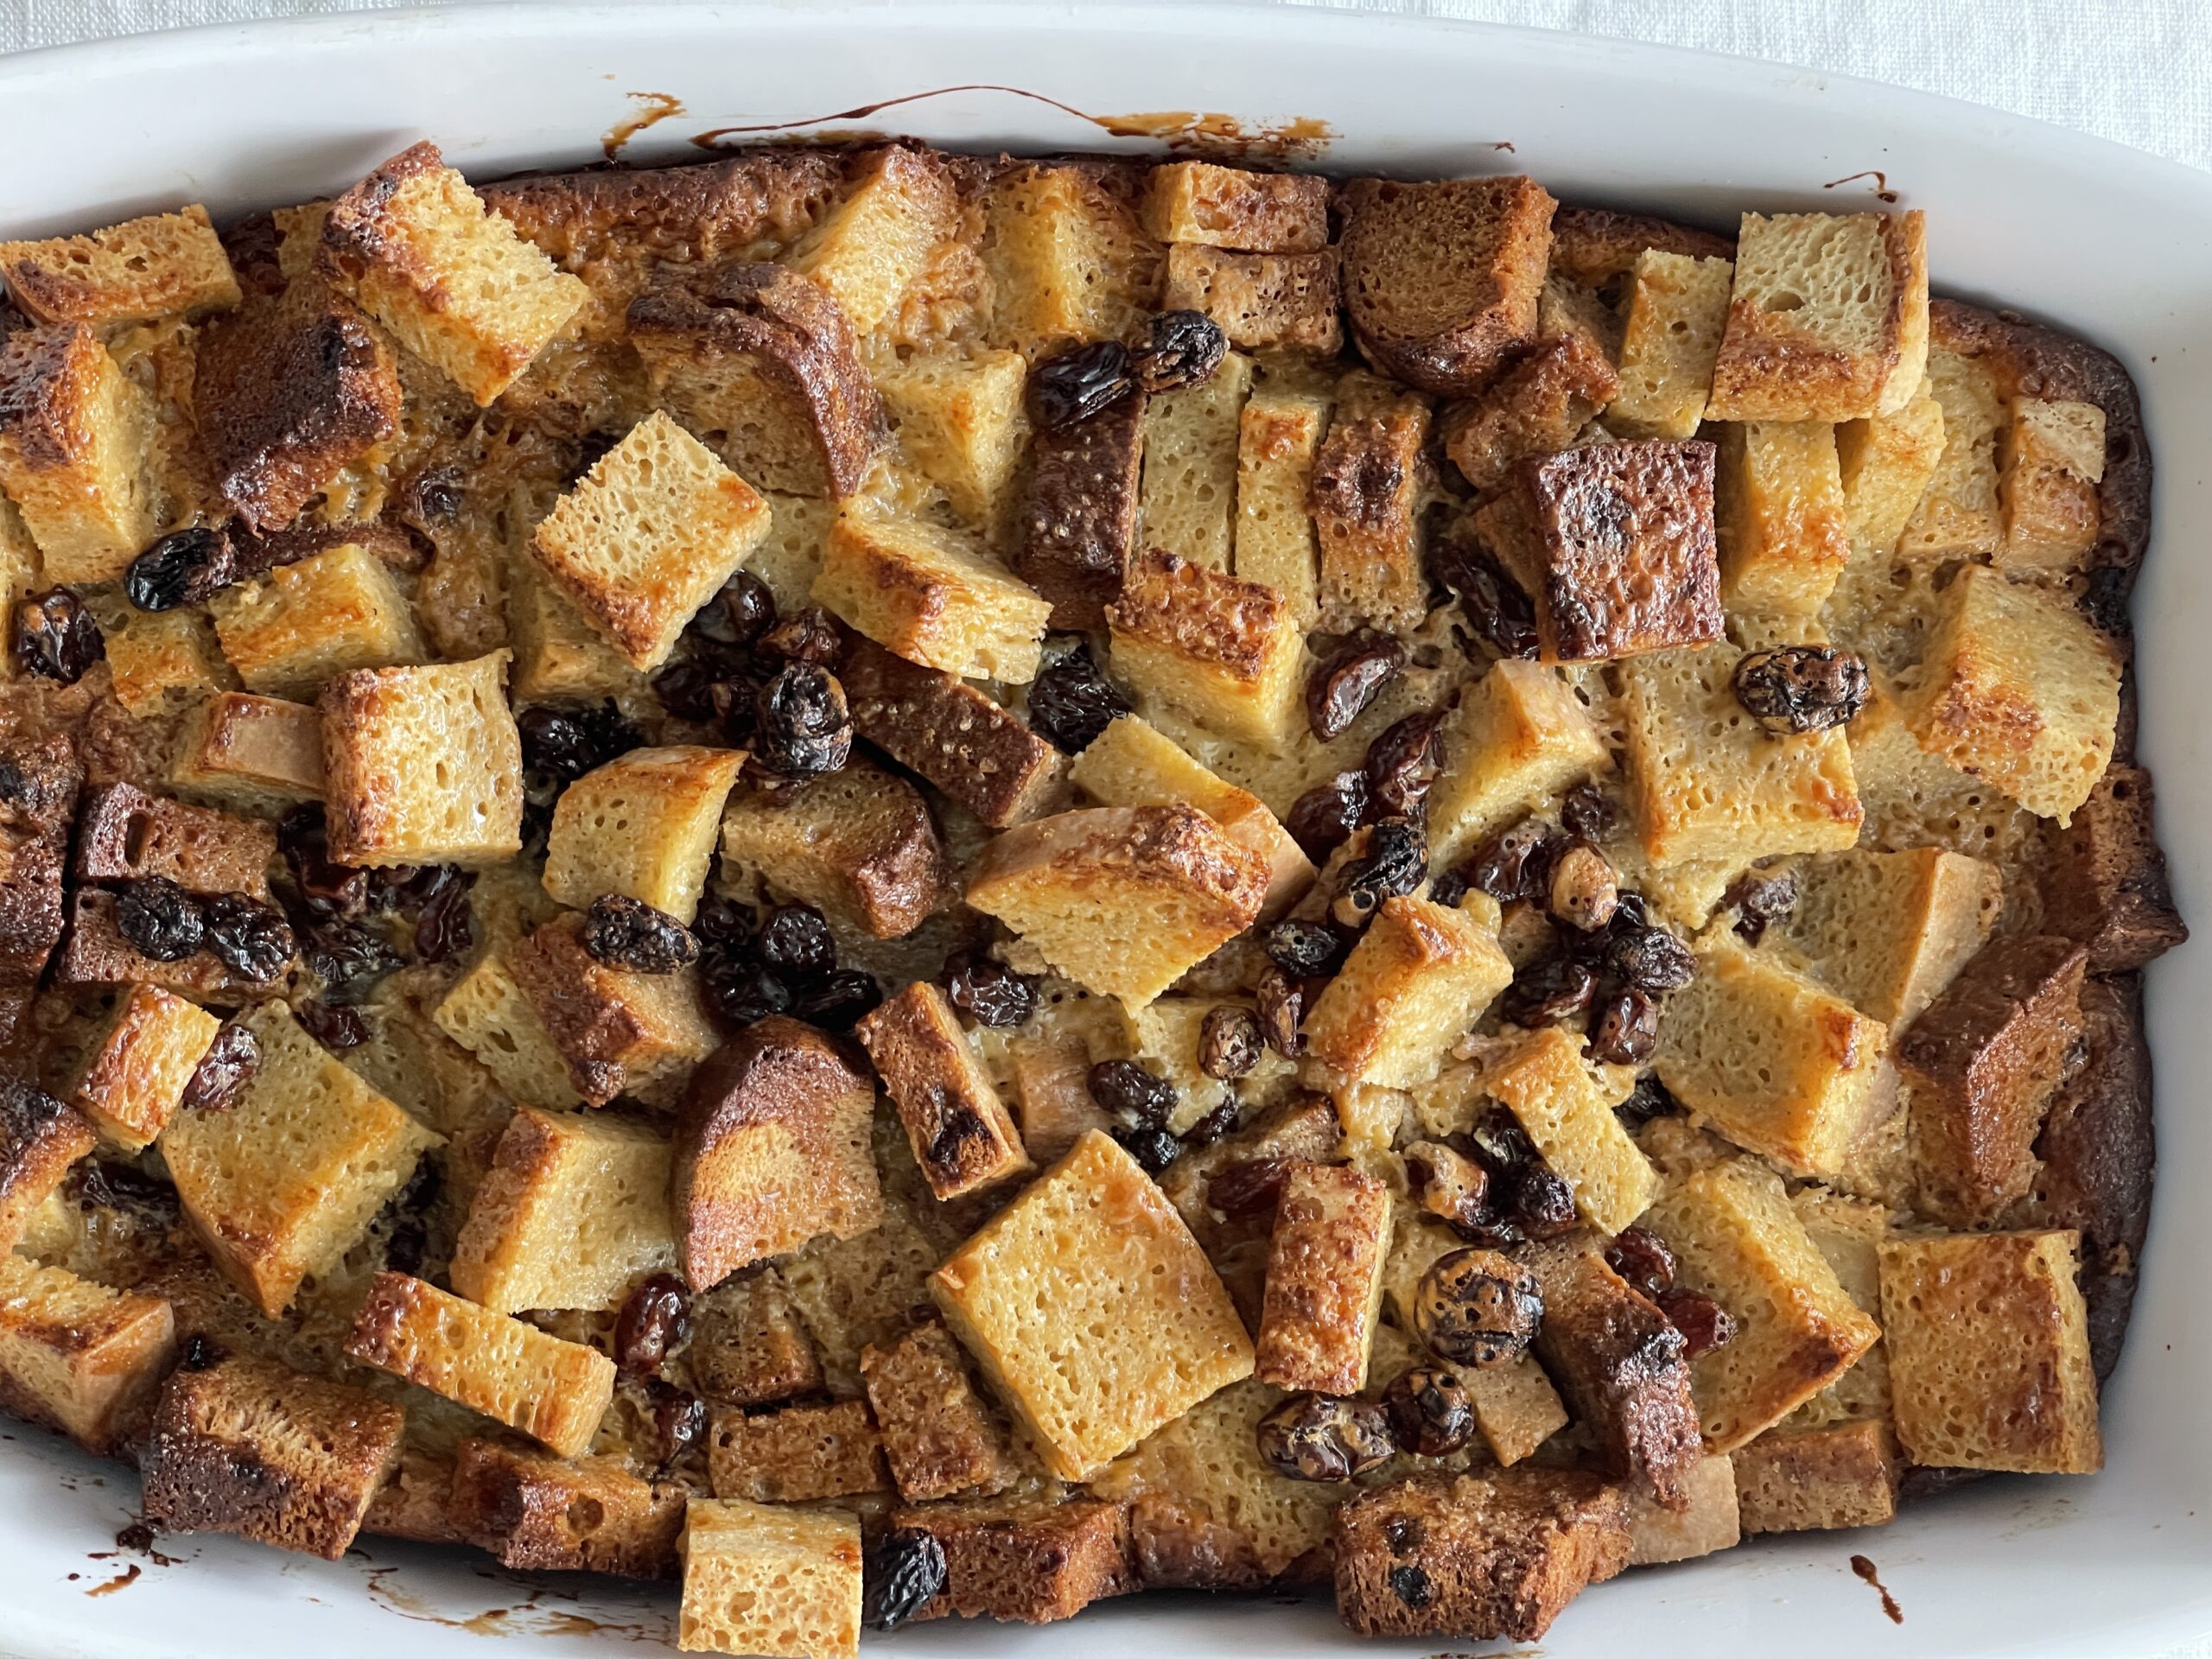 GLUTEN-FREE BREAD AND BUTTER PUDDING